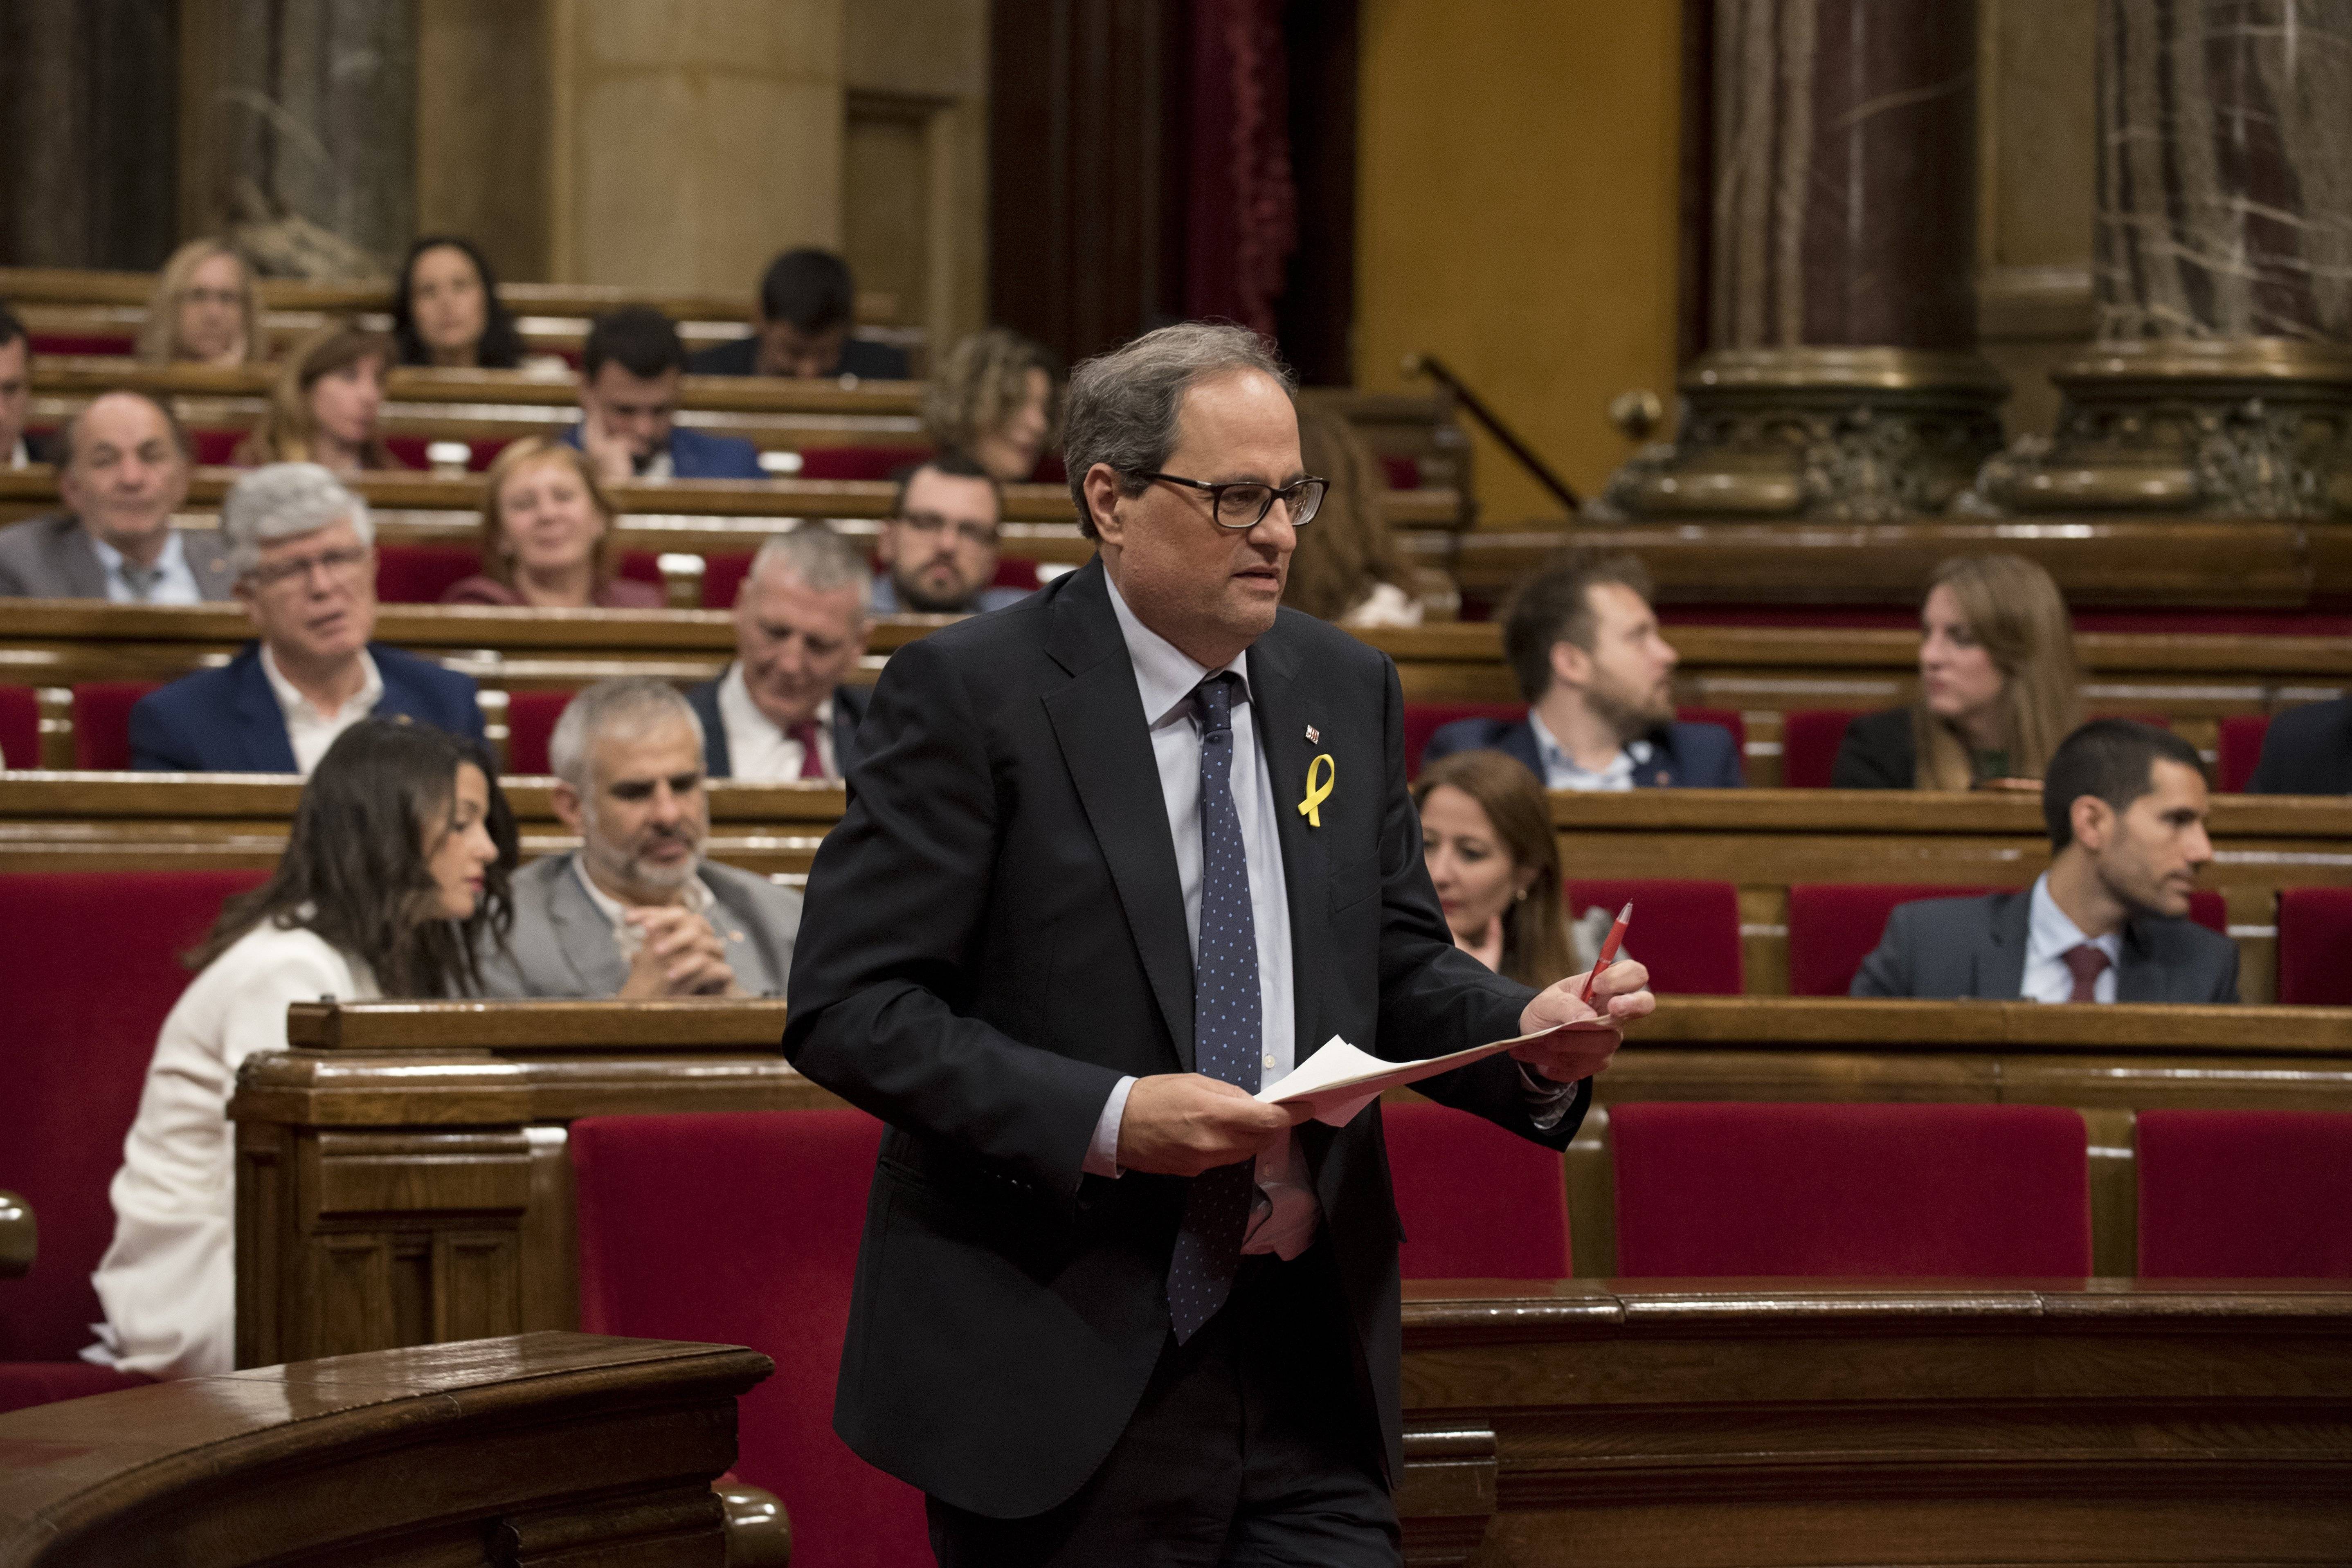 Catalan presidency: Torra loses first vote, with second vote hinging on CUP